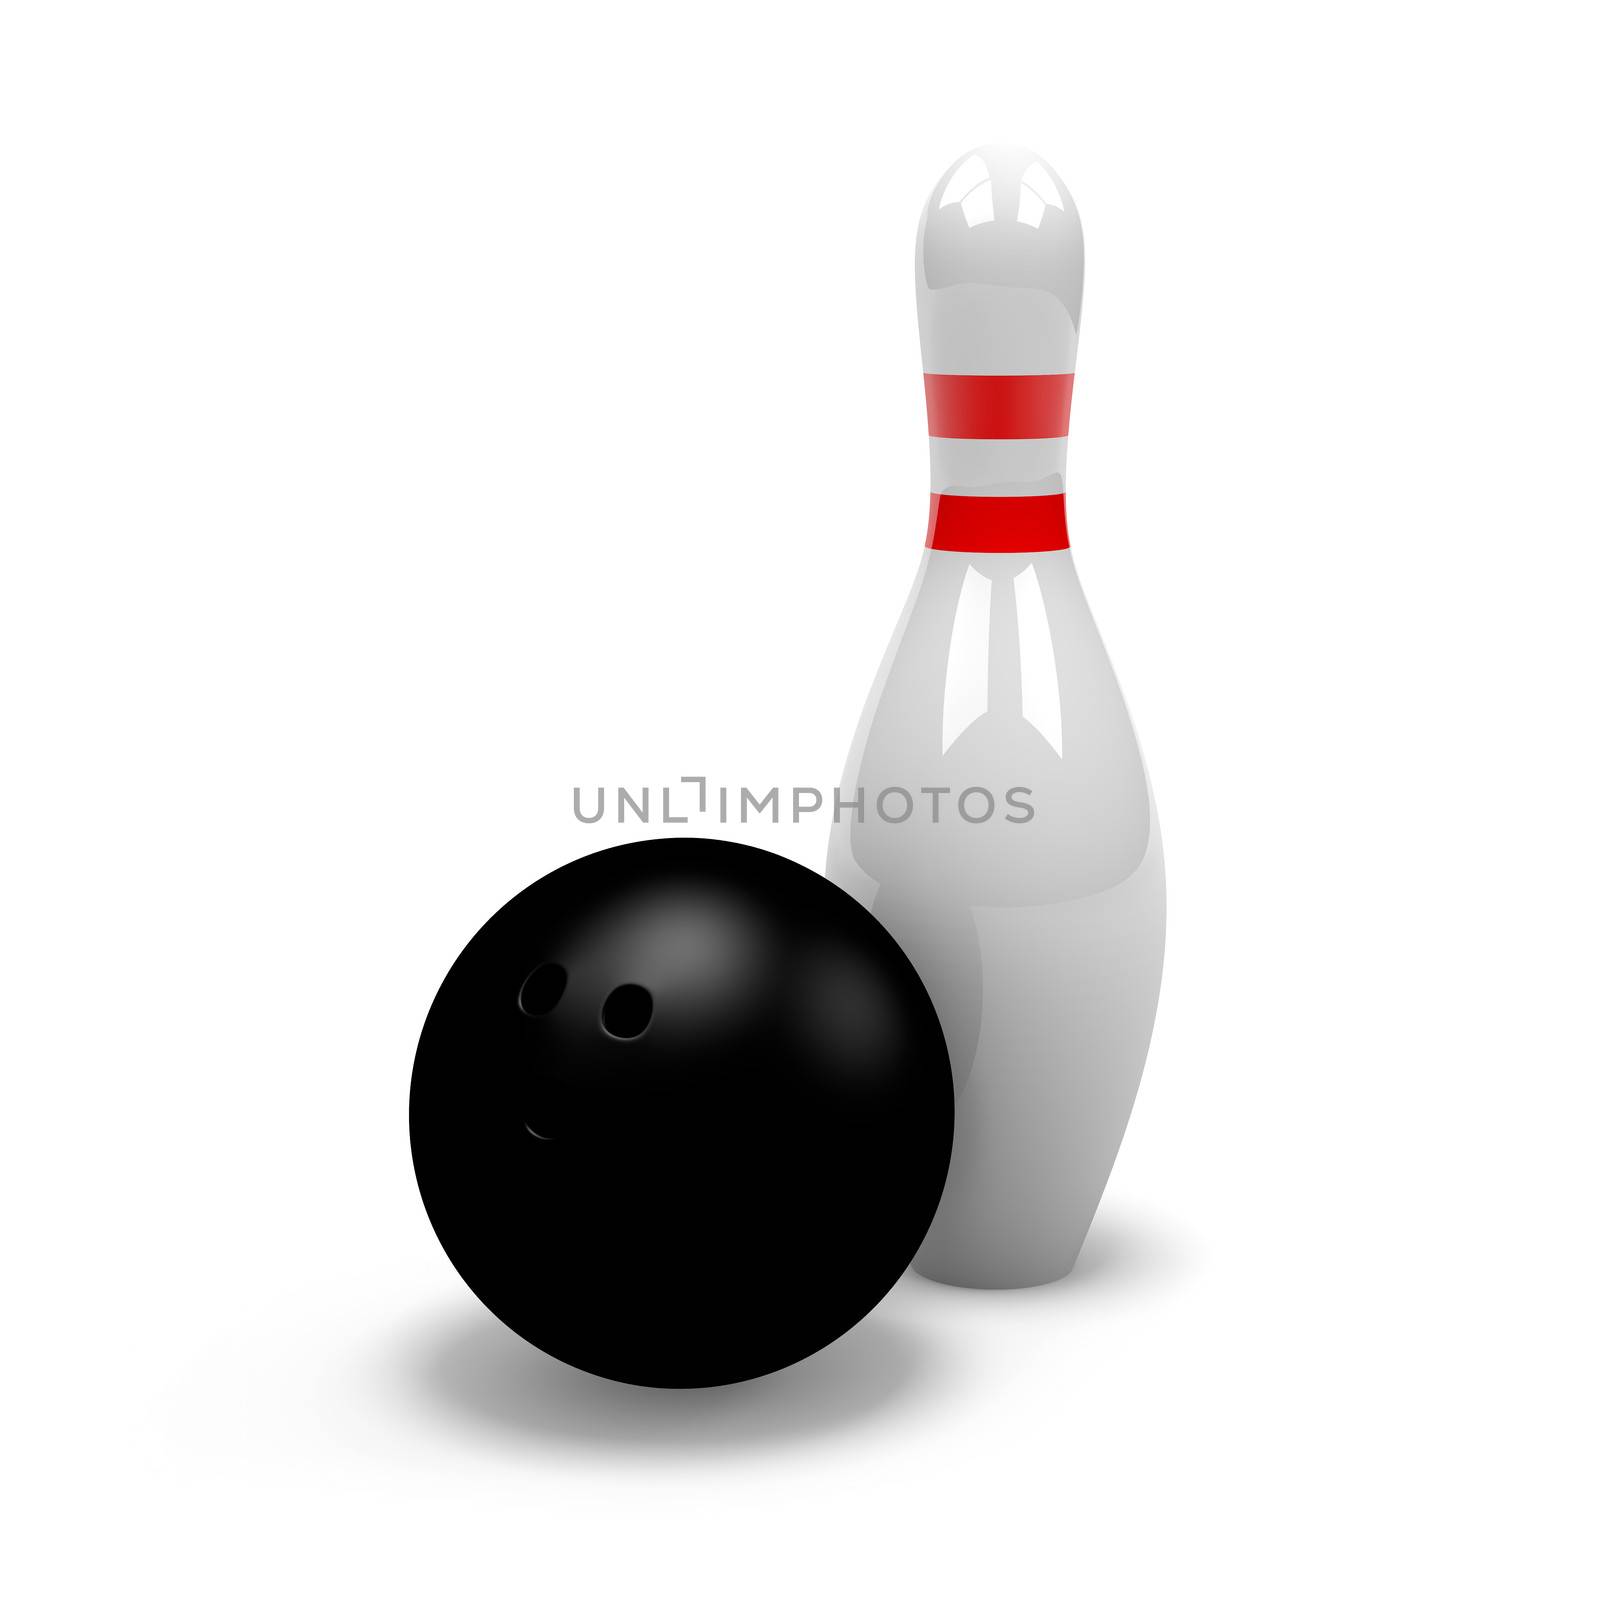 One Single White and Red Bowling Skittle with Black Ball on White Background 3D Illustration